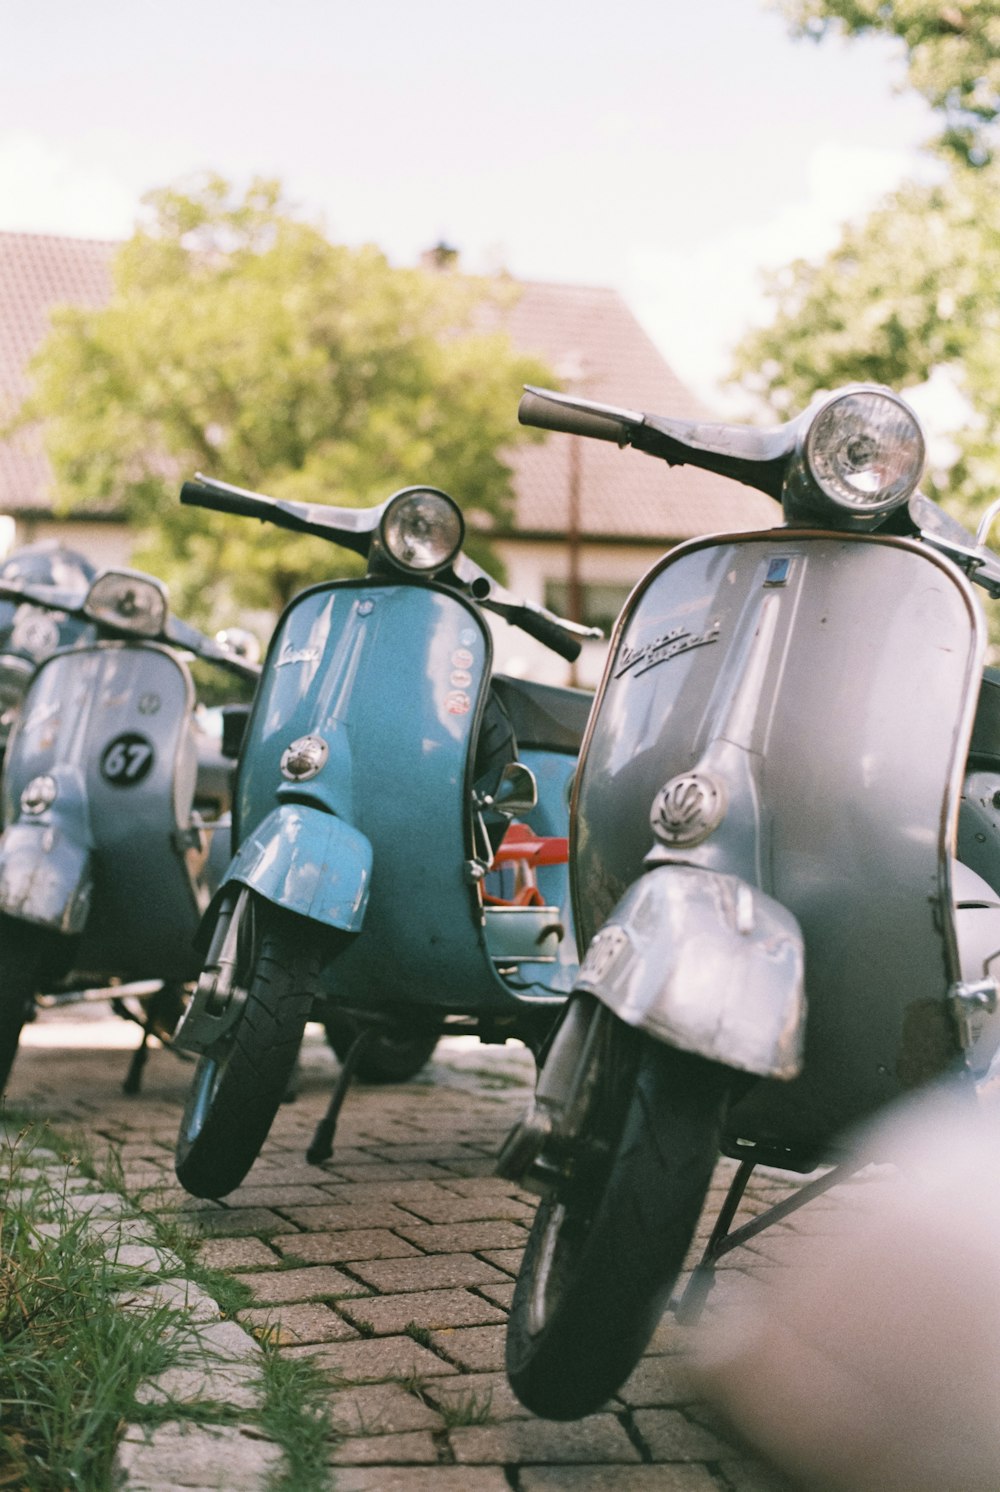 a row of motorcycles parked on a brick road